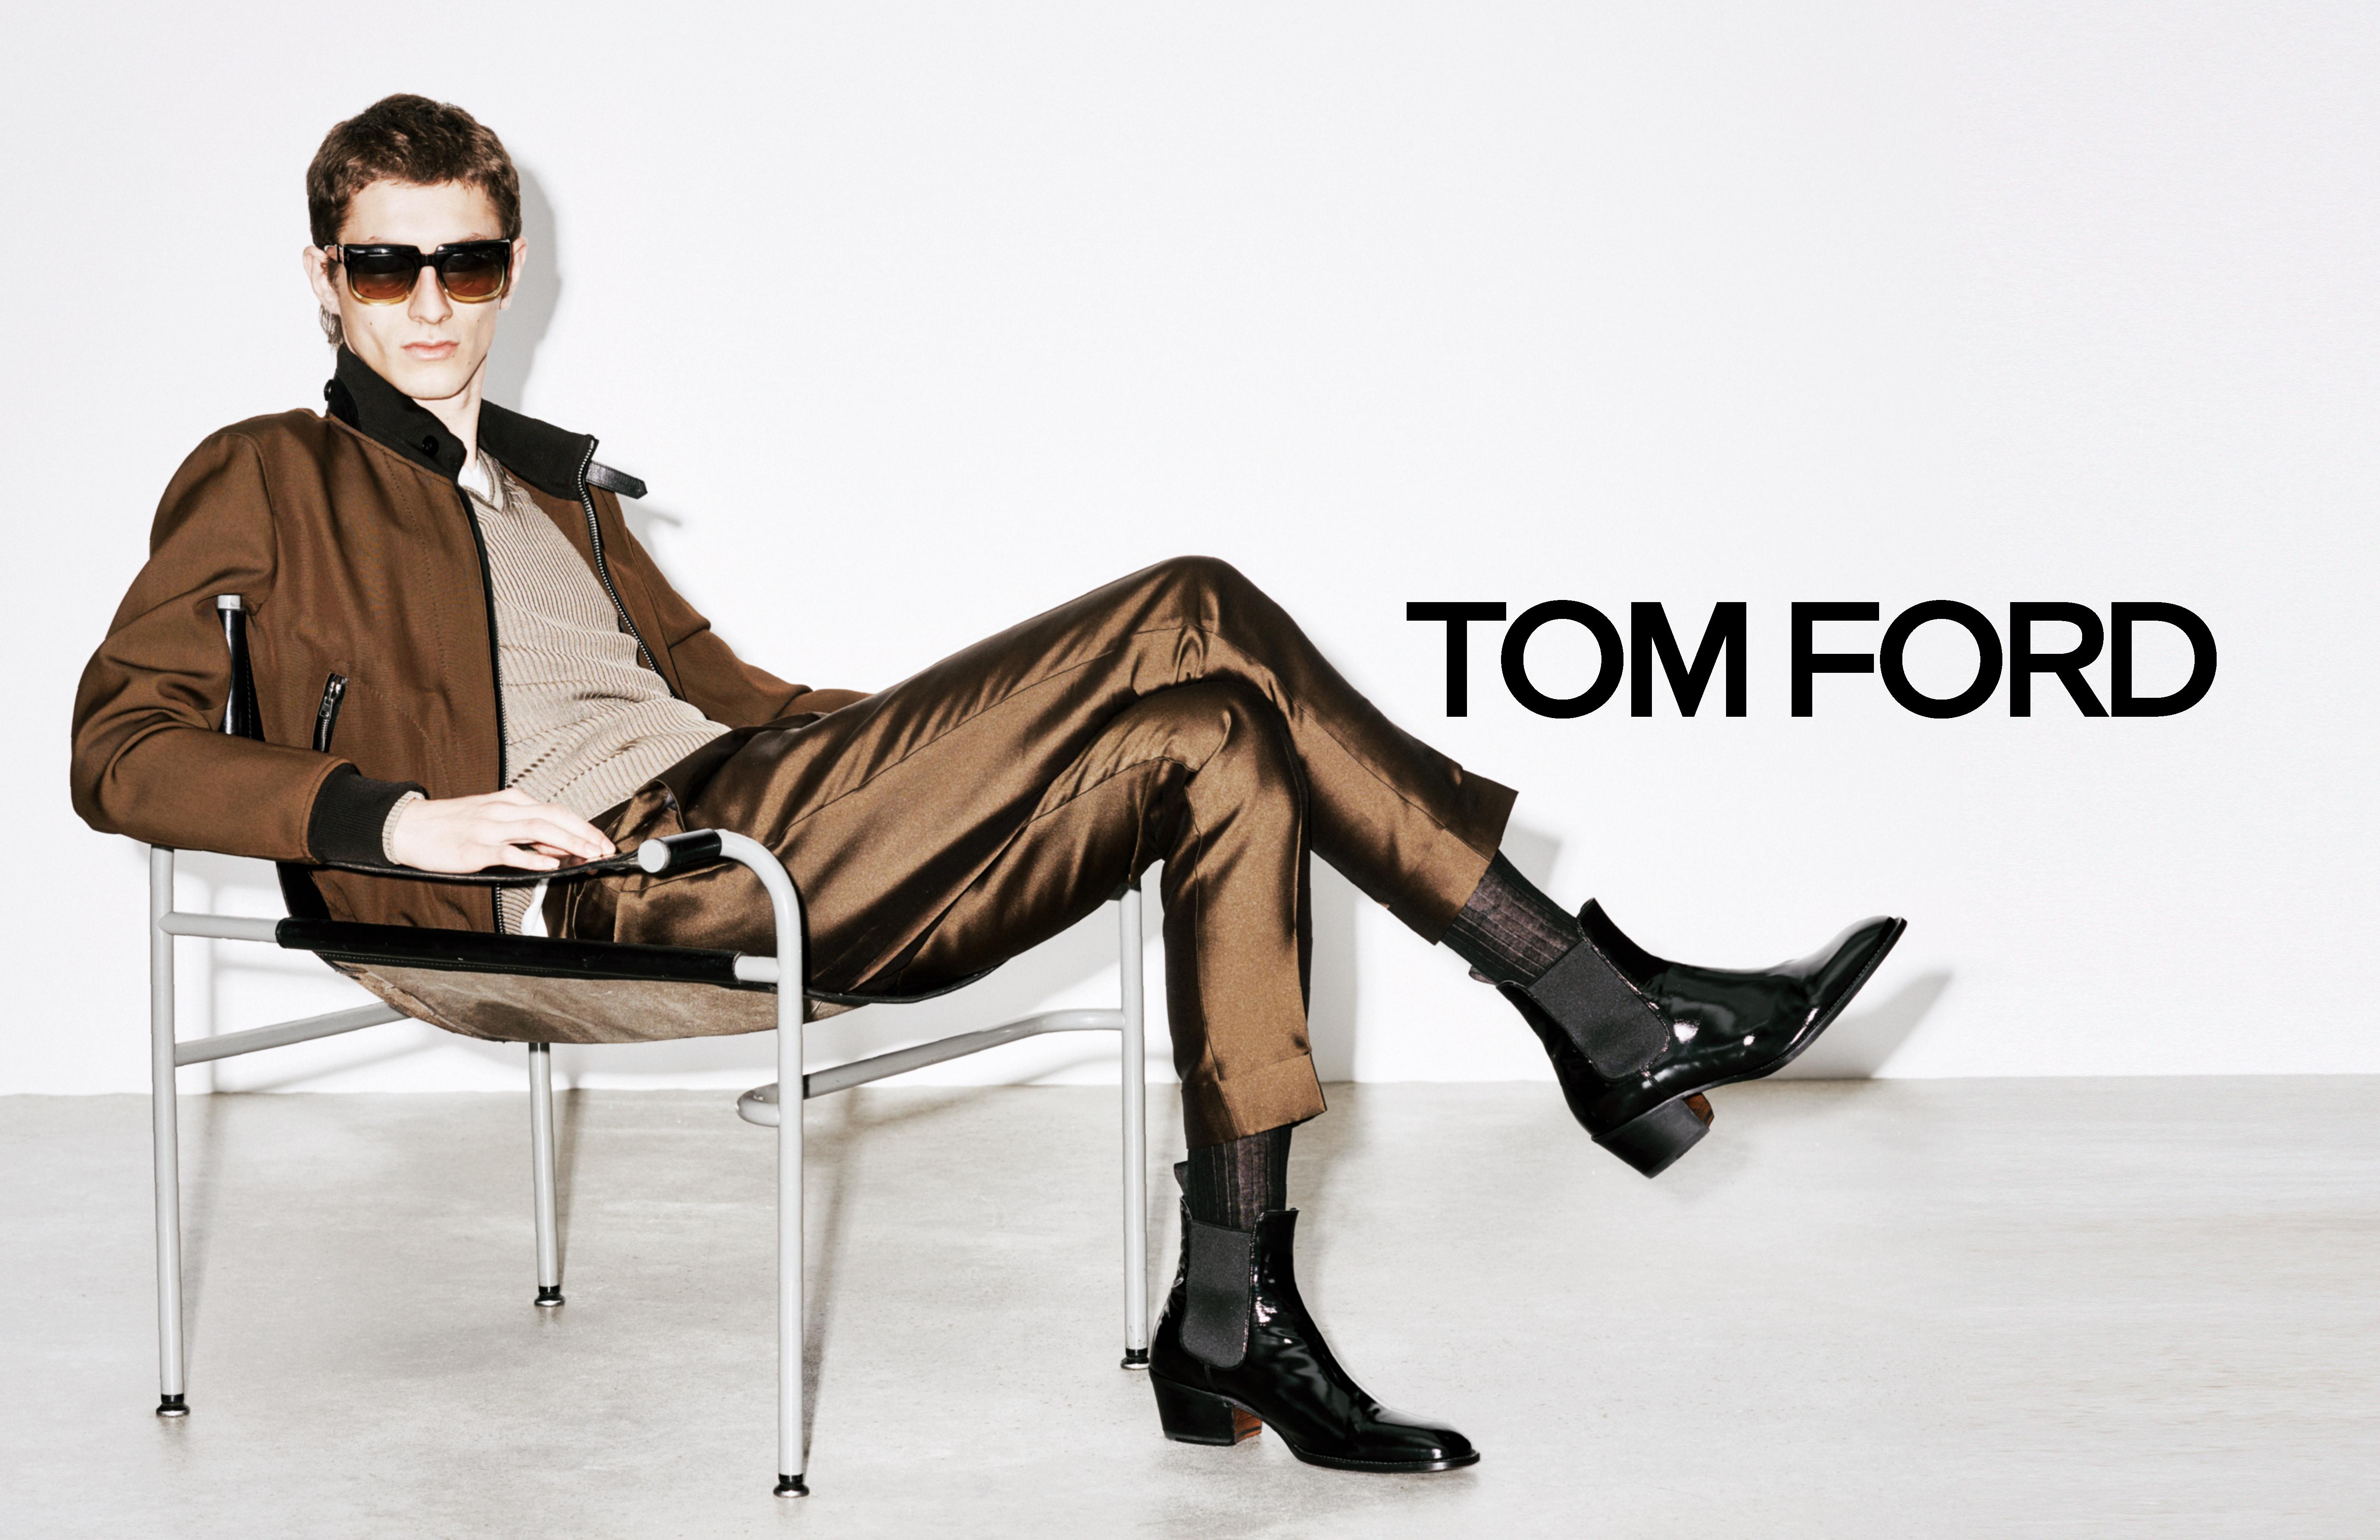 Introducir 89+ imagen tom ford for men campaign - Abzlocal.mx